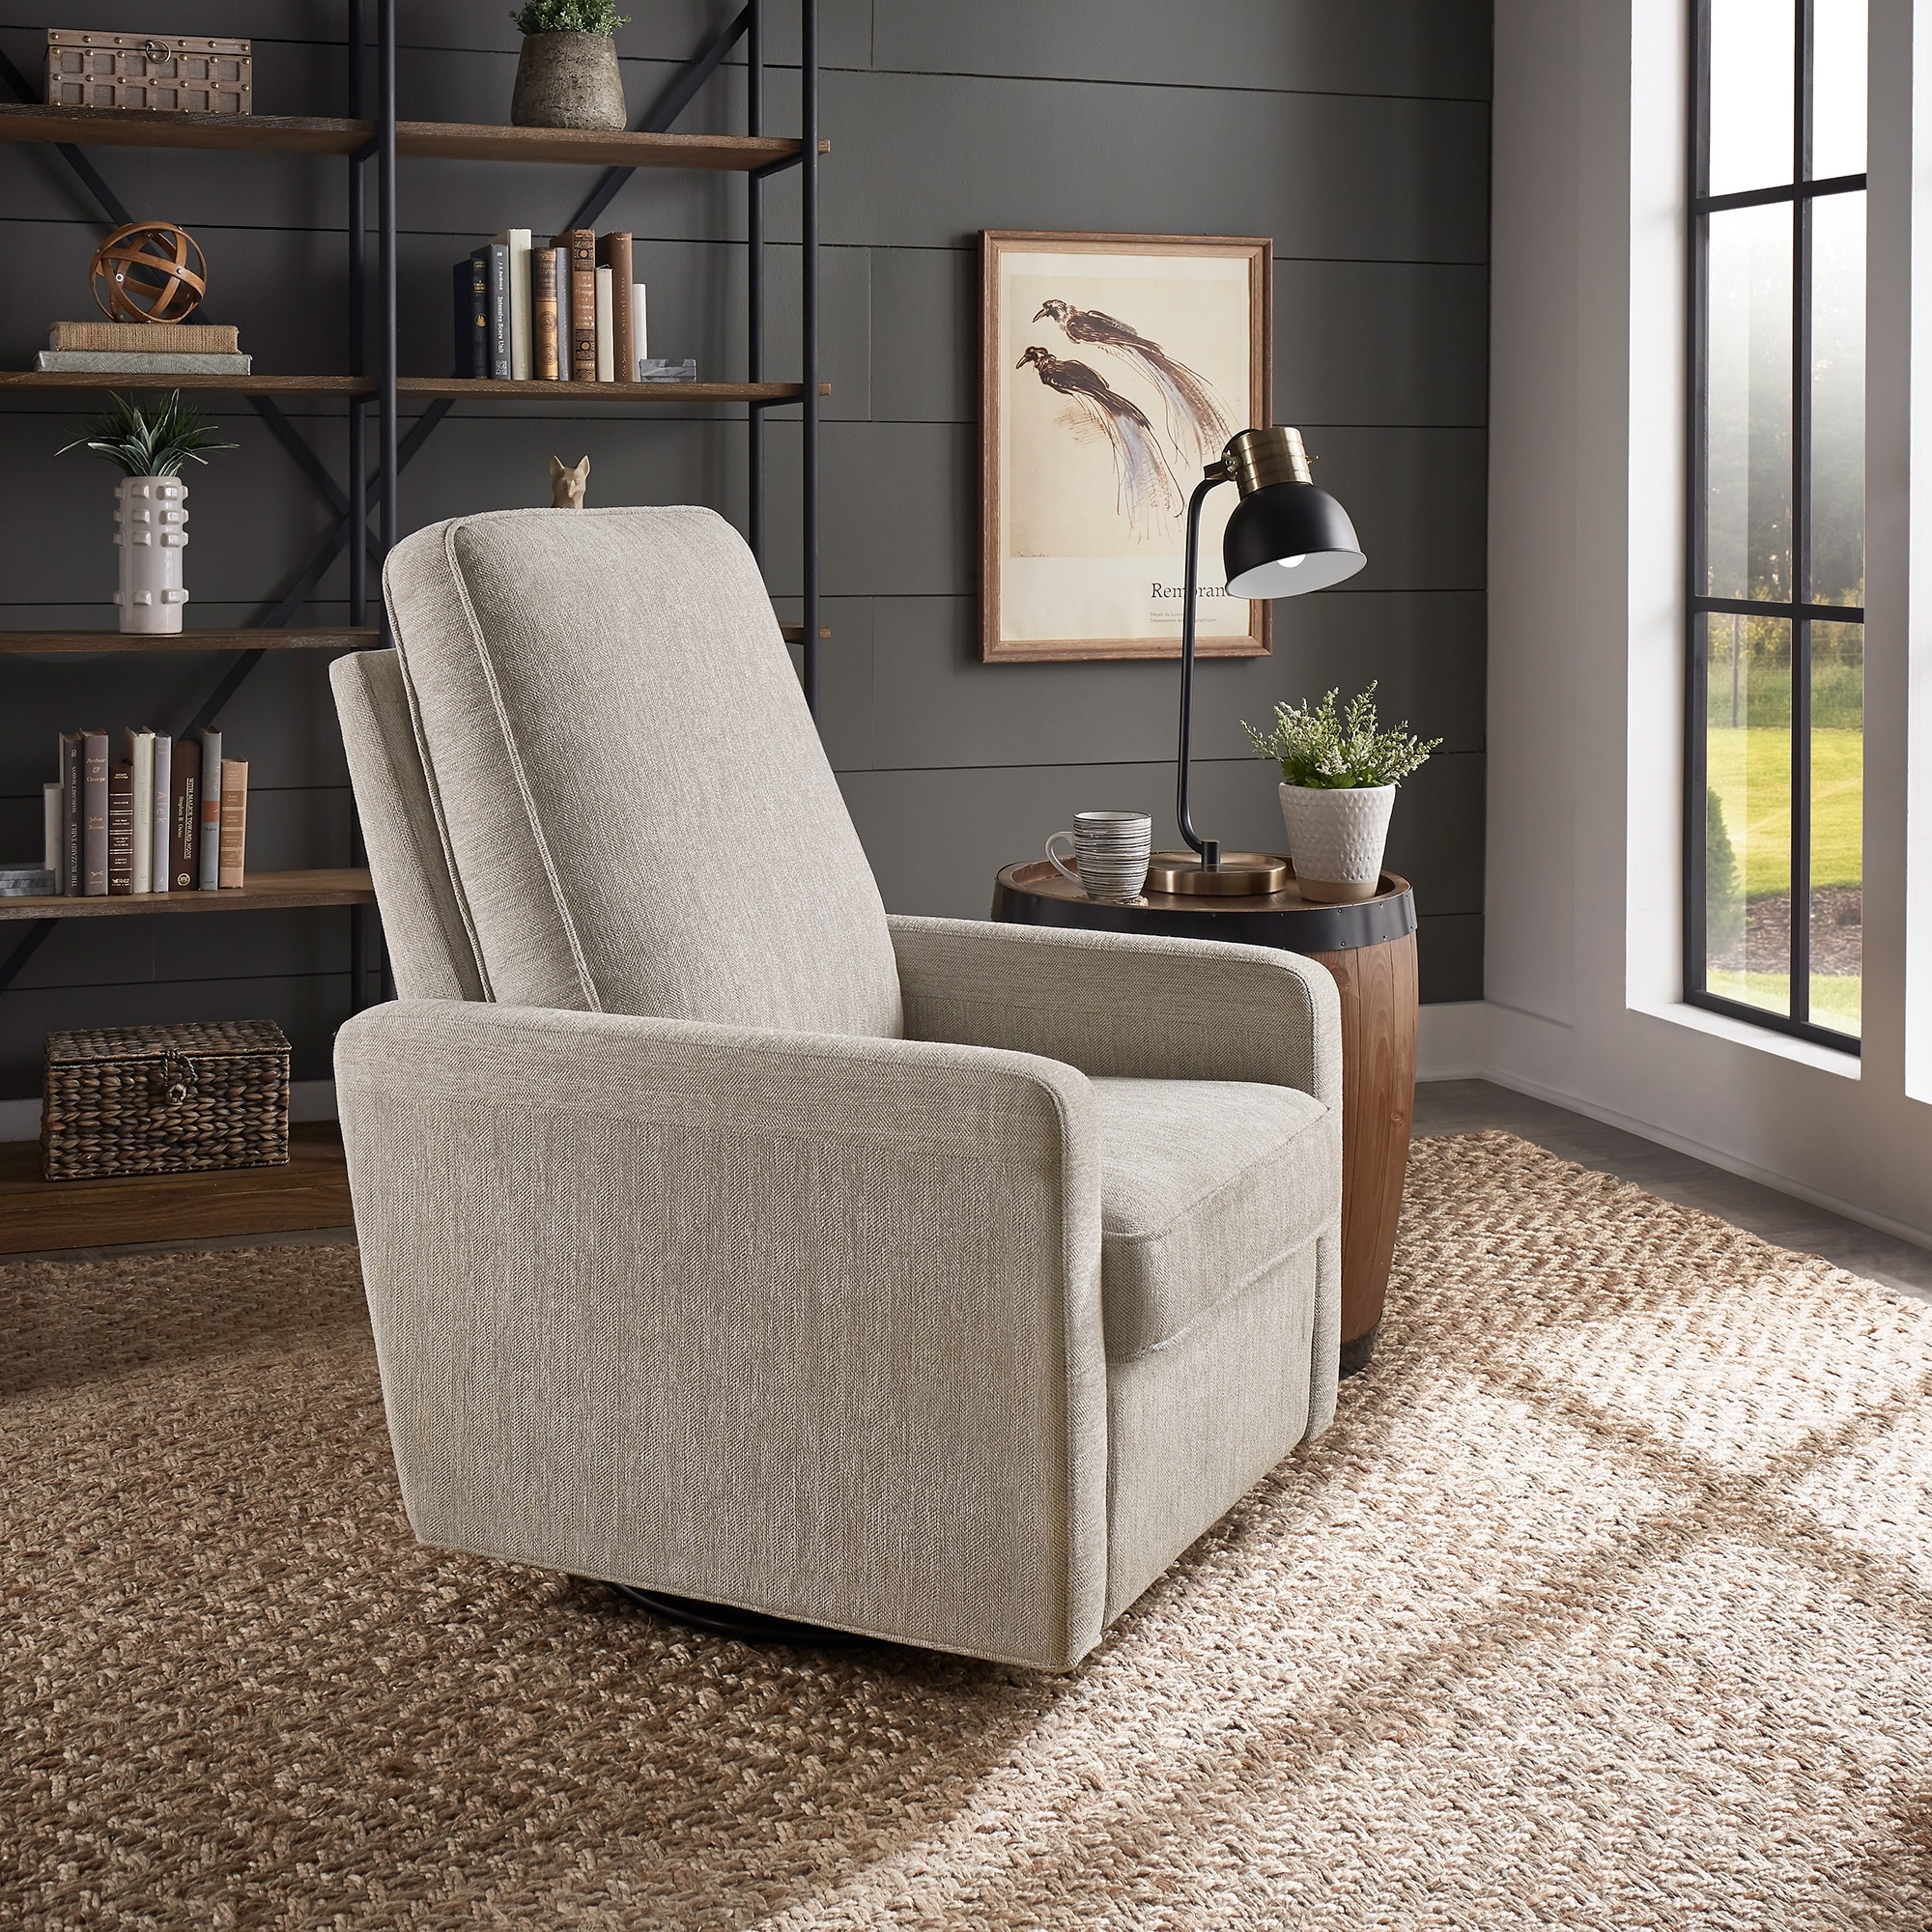 https://ak1.ostkcdn.com/images/products/is/images/direct/fe1b5958ada6d6c66156d9e002ef000c2d5b00b6/Cadeau-Push-Back-Recliner-Chair-by-iNSPIRE-Q-Modern.jpg